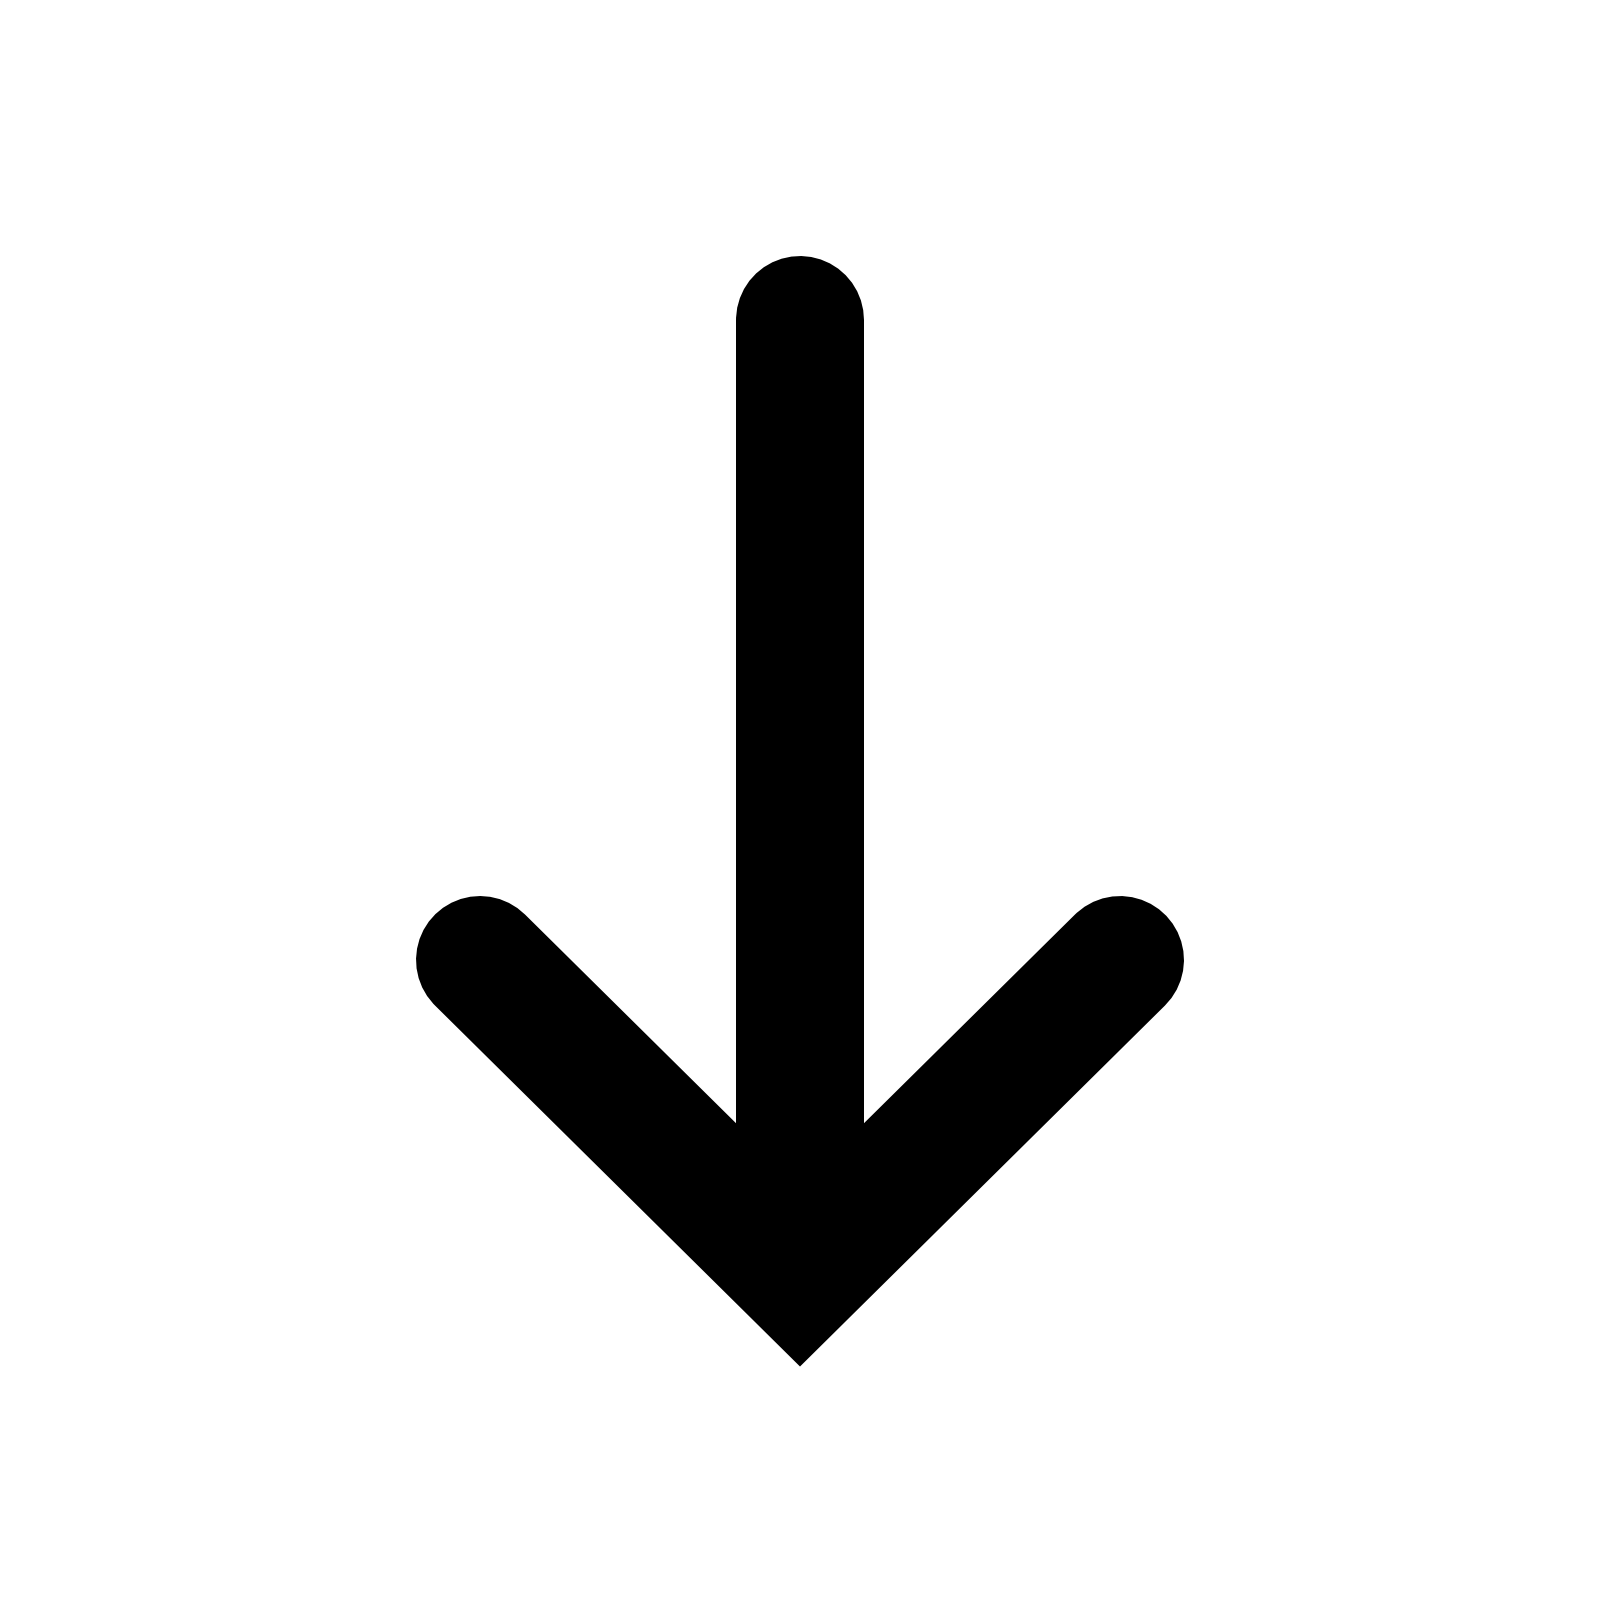 Down Filled Icon - Down Arrow, Transparent background PNG HD thumbnail